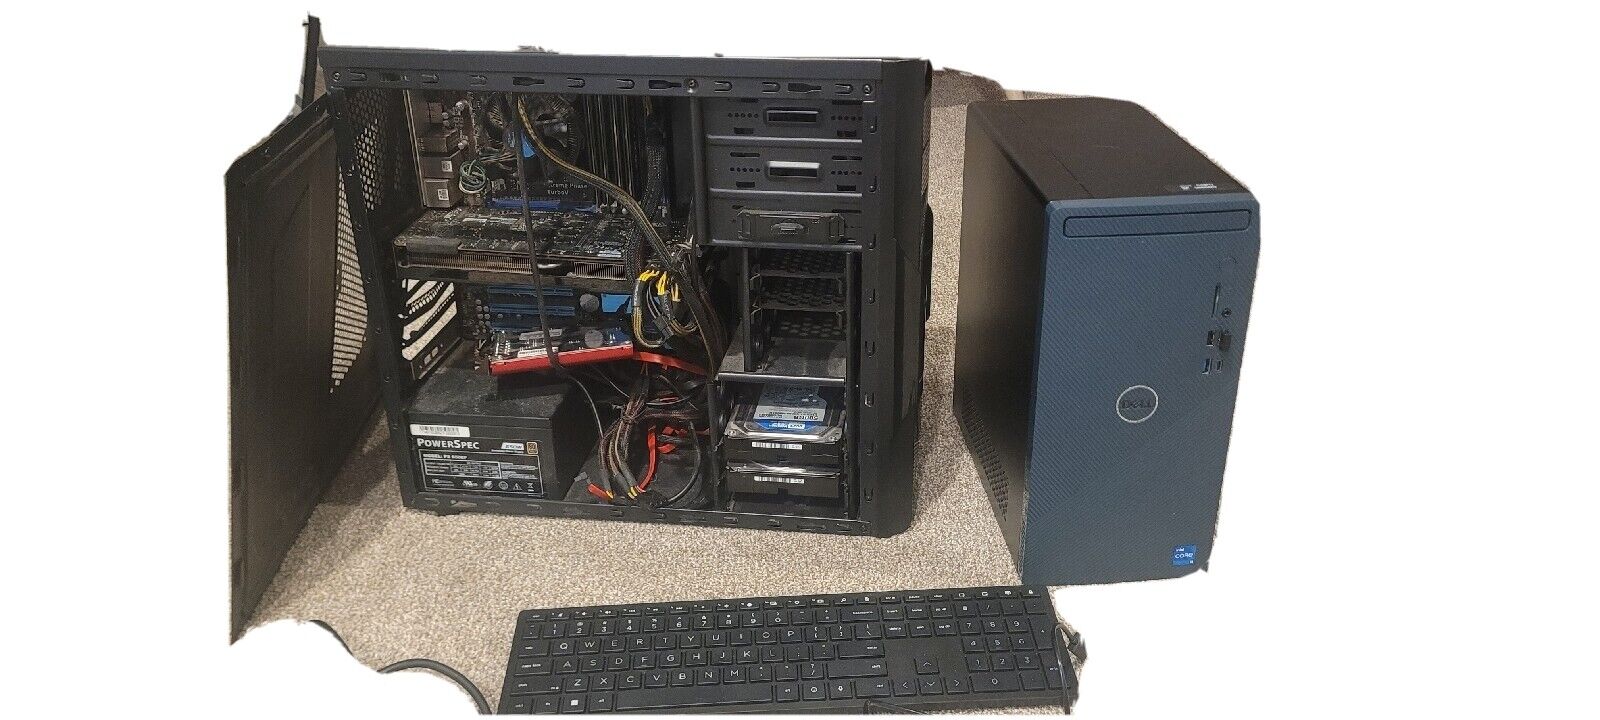 1 Used / 1 old salvagable parts pc. All parts in great condition. 